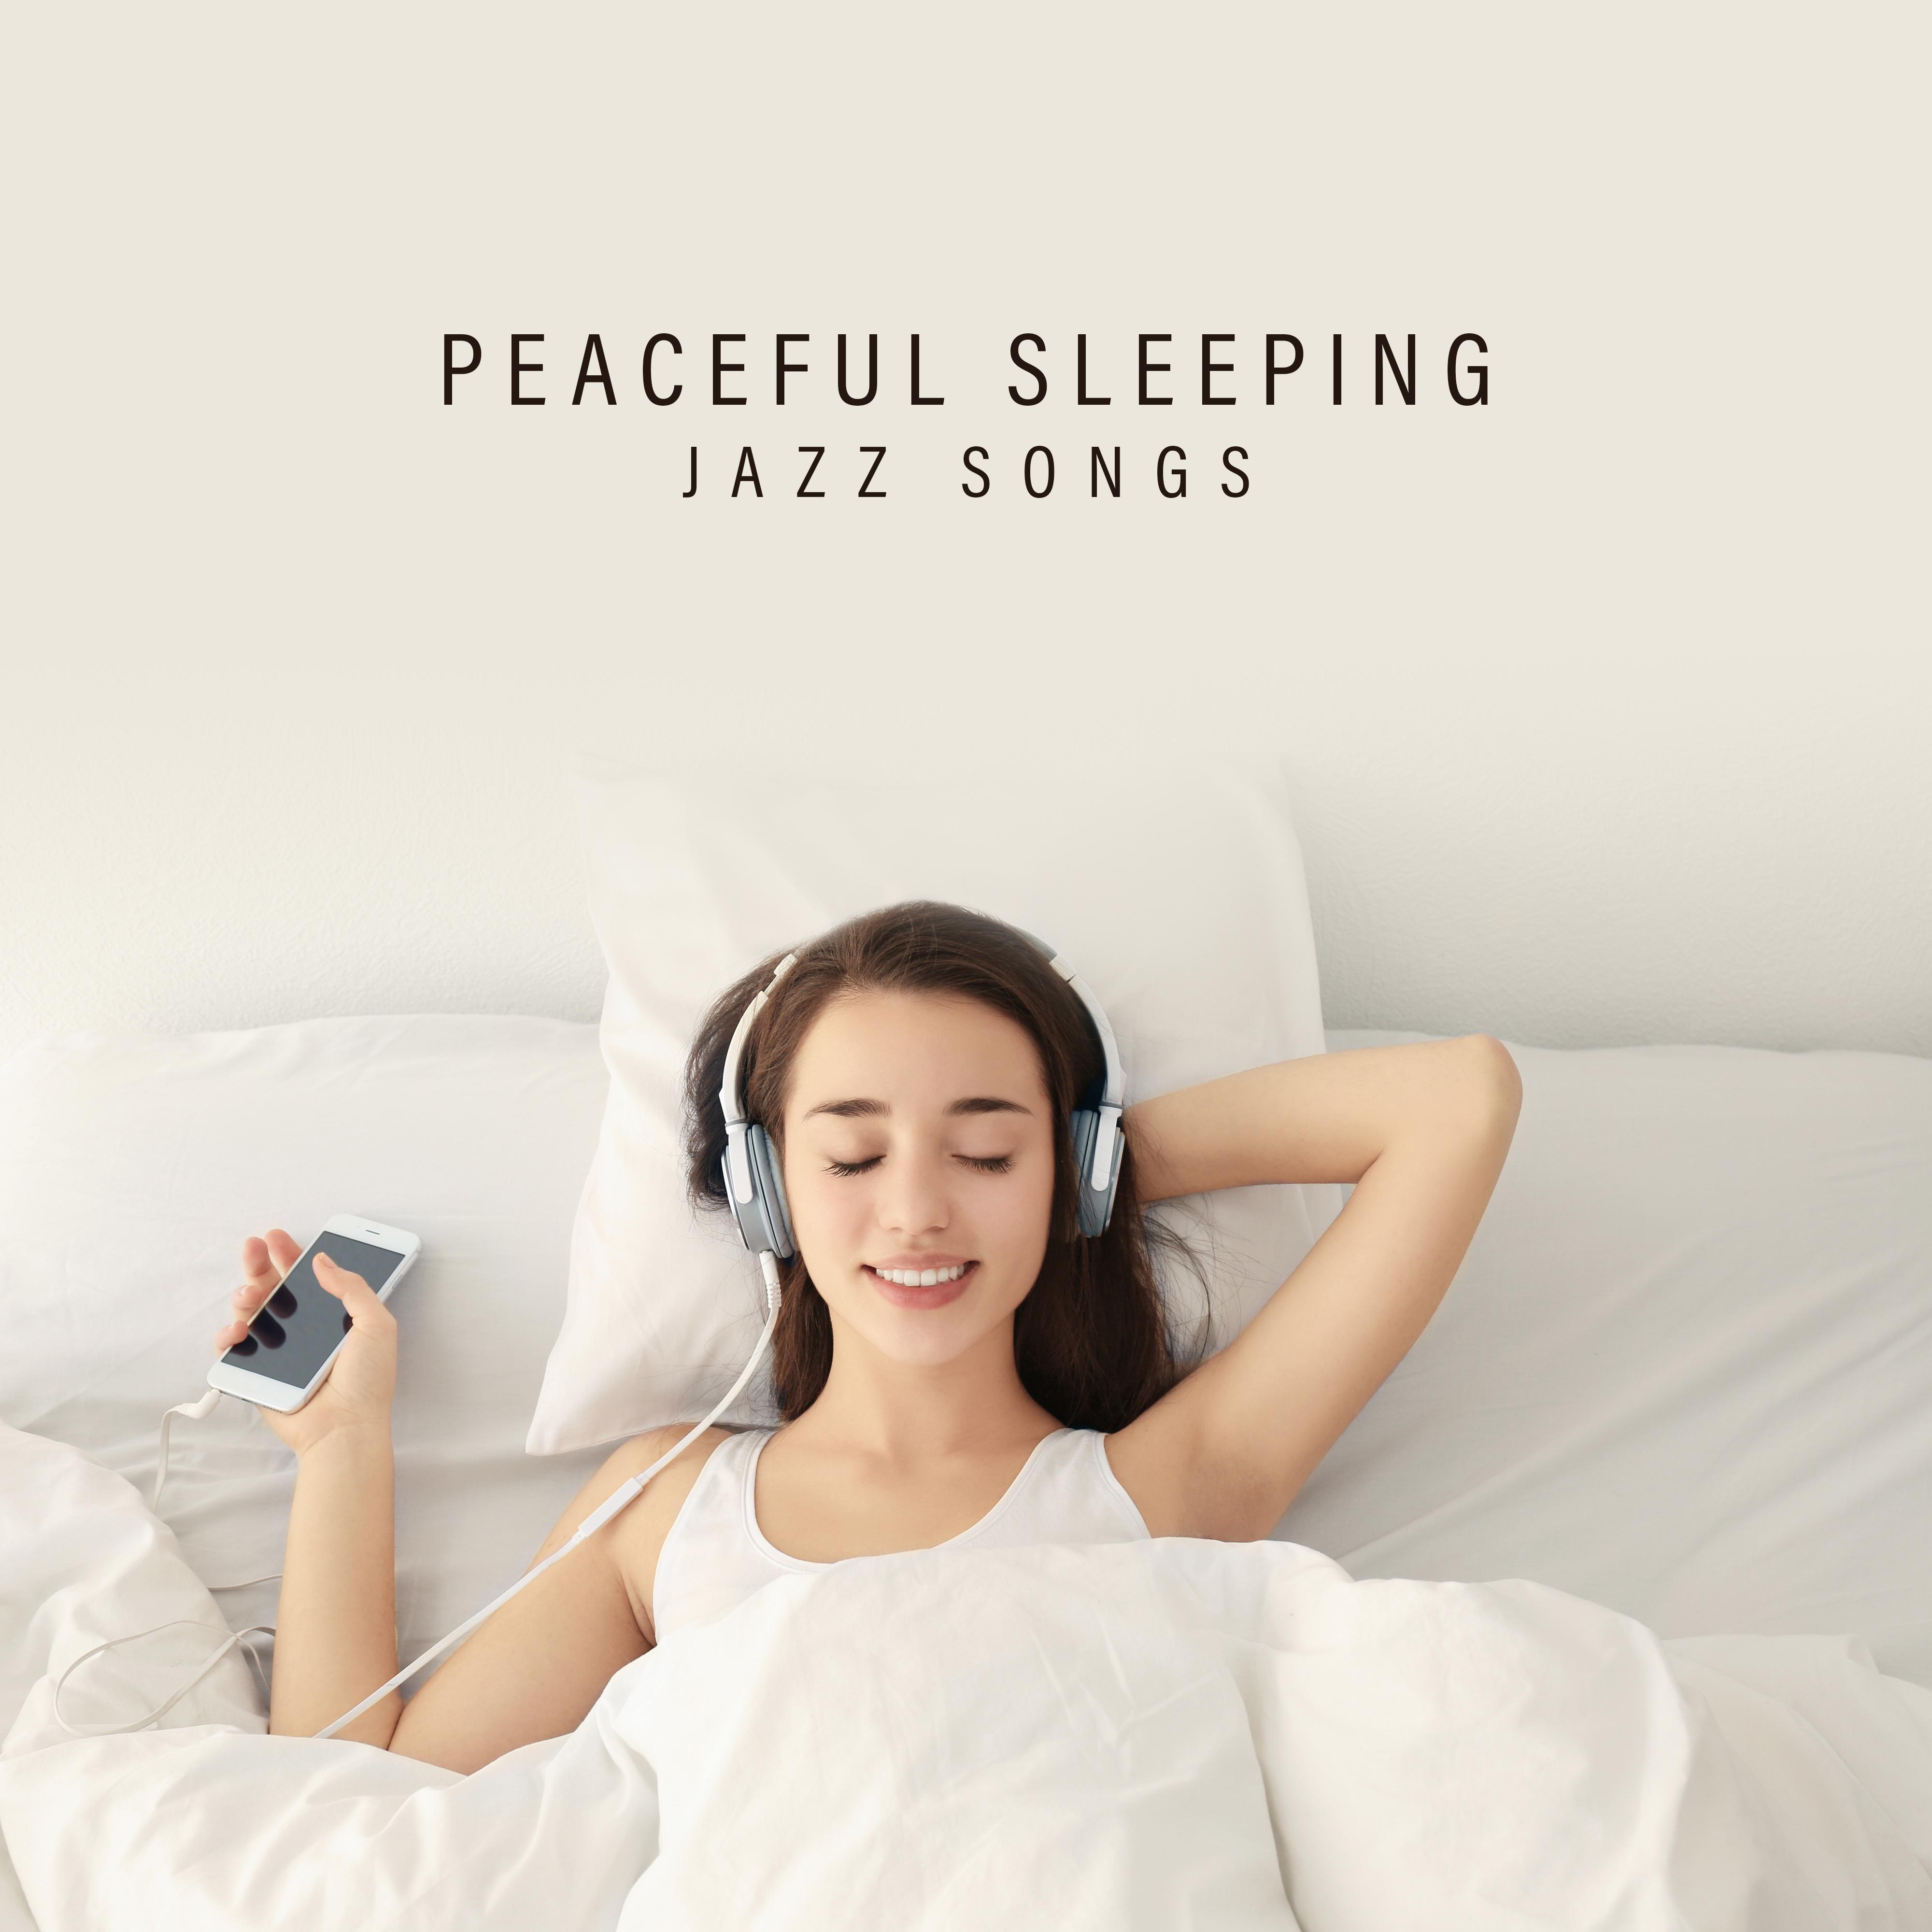 Peaceful Sleeping Jazz Songs: 15 Instrumental Soft Melodies for Calming Down, Cure Insomnia & Good Sleep, Piano, Sax & Giutar Sounds